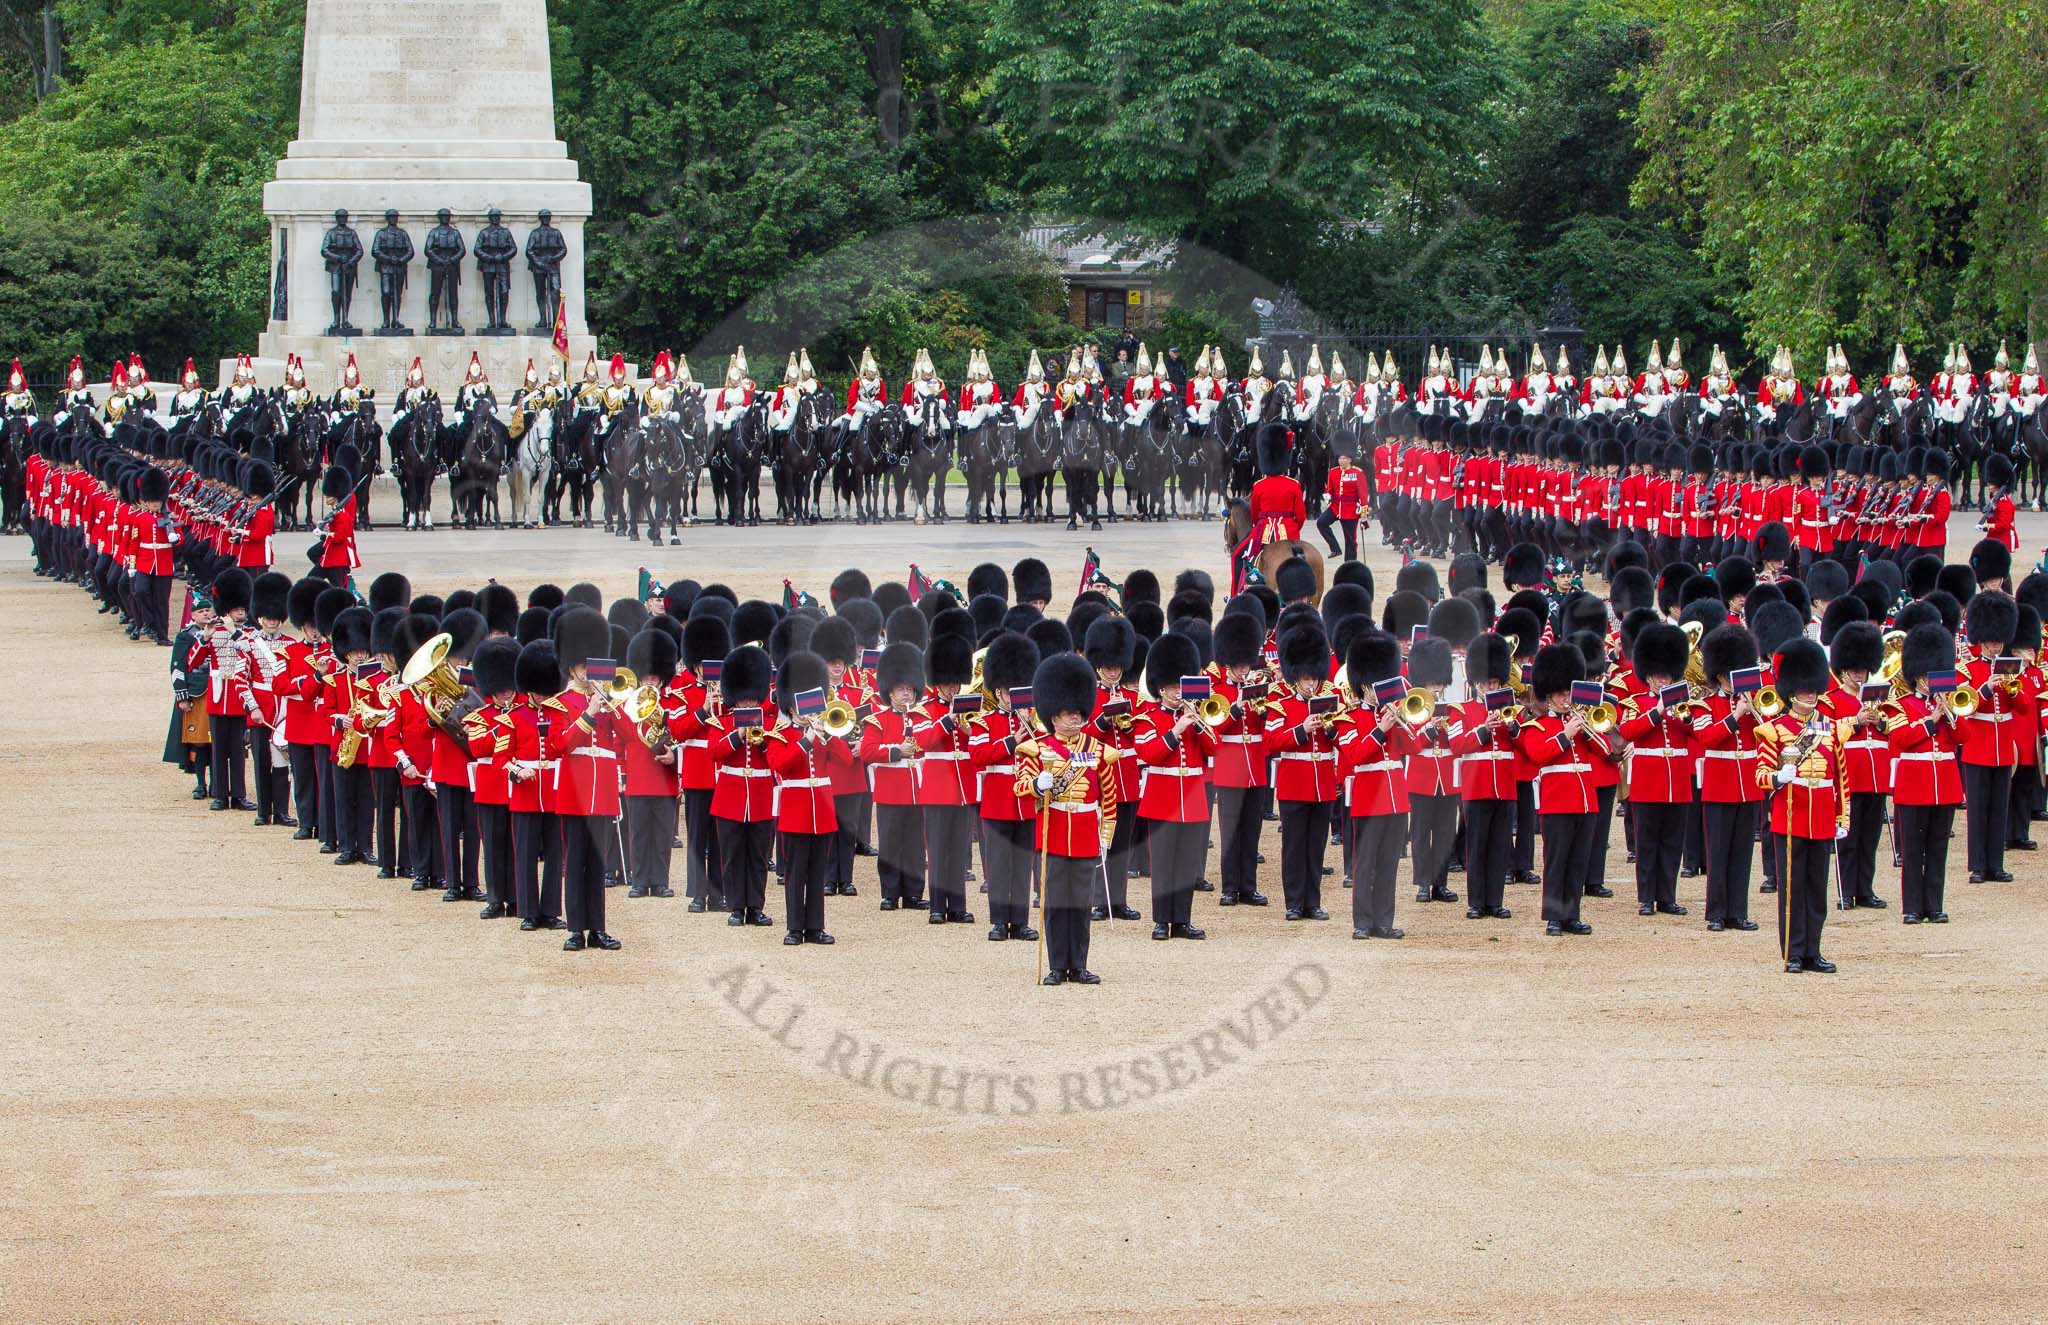 The Colonel's Review 2012: The March Past - No. 2 and No. 3 Guard, in front the Massed Bands..
Horse Guards Parade, Westminster,
London SW1,

United Kingdom,
on 09 June 2012 at 11:47, image #355